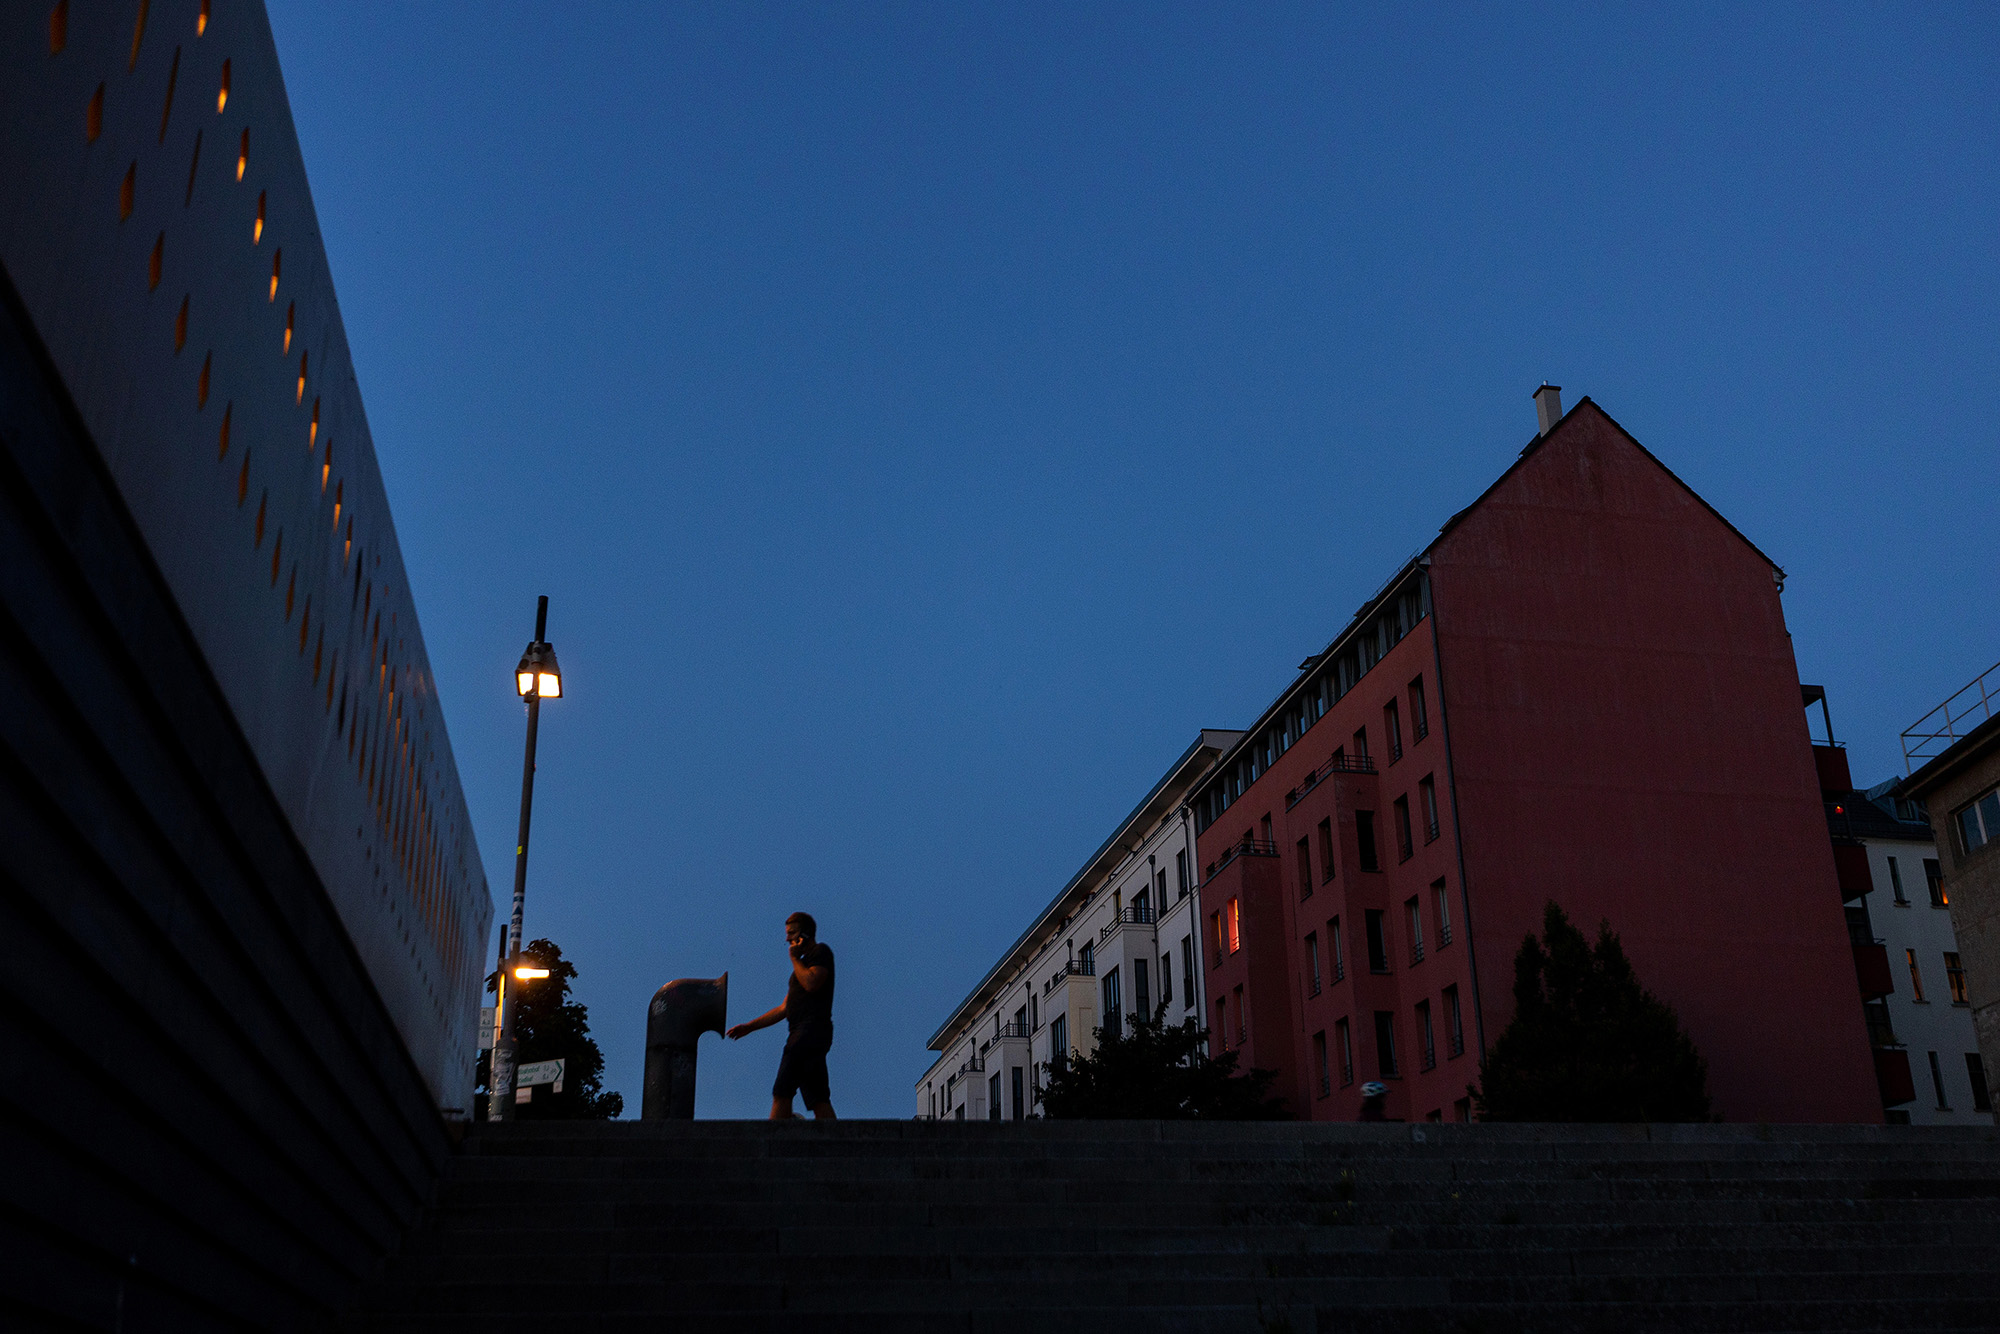 A street lamp lights a resident outside partially lit block of apartments at dusk in Berlin on Tuesday, August 16.